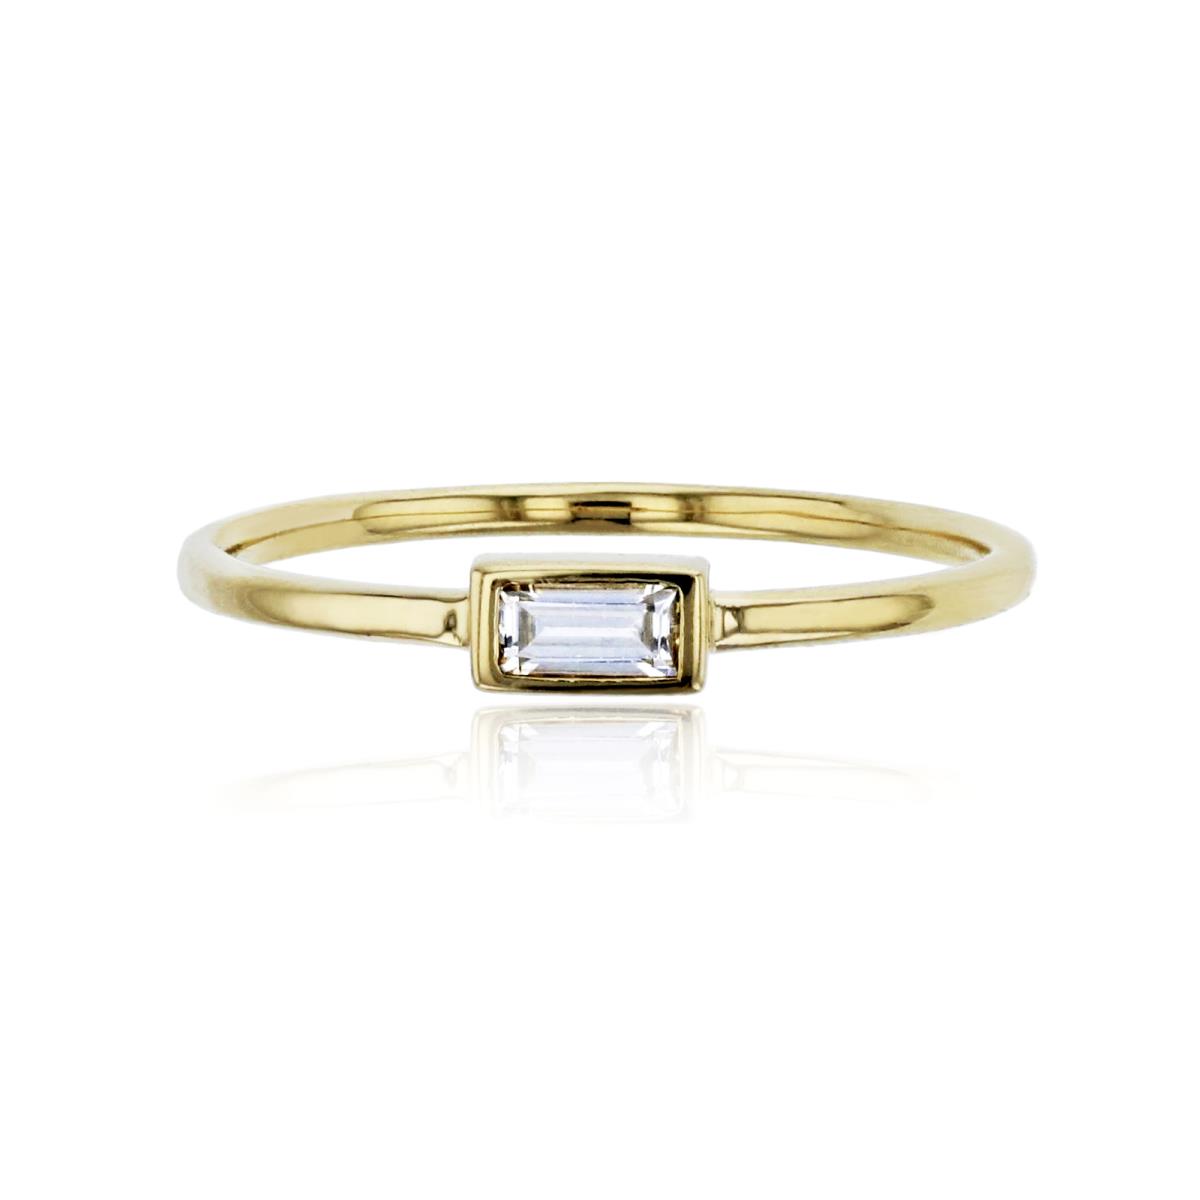 10K Yellow Gold Polished Baguette Bezel Solitaire Ring